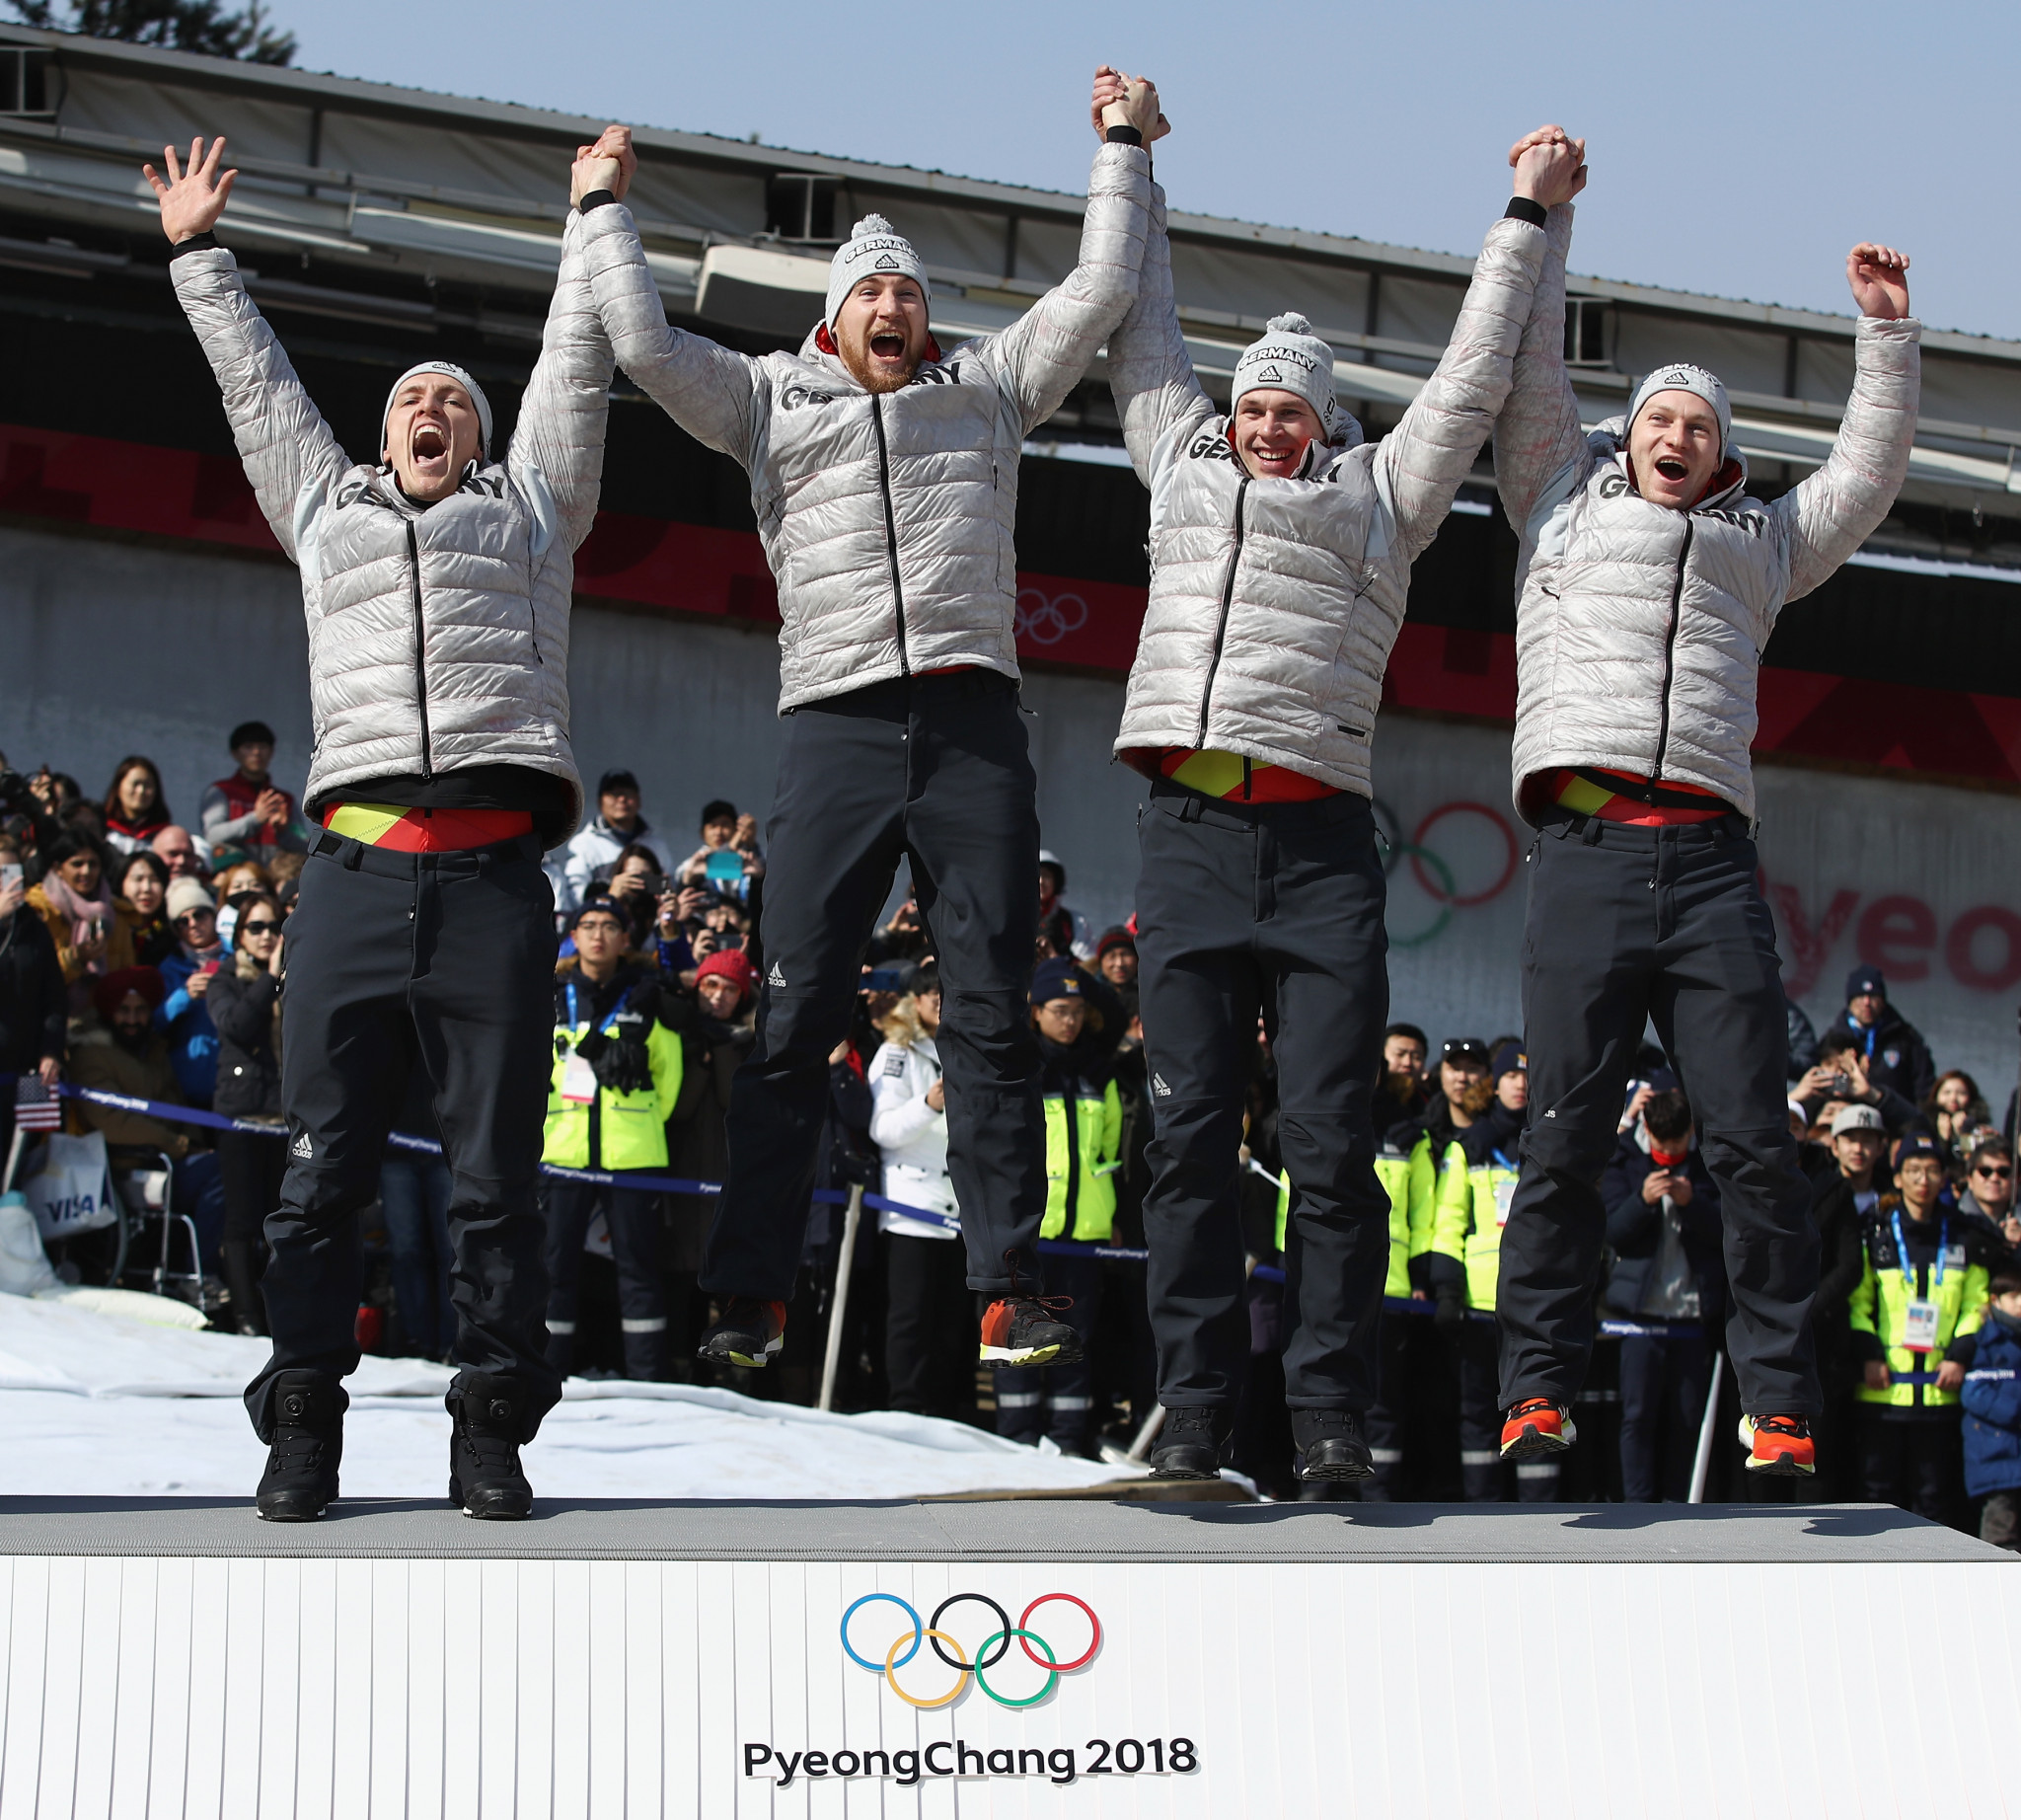 Germany enjoyed gold medal success in four-man bobsleigh ©Getty Images